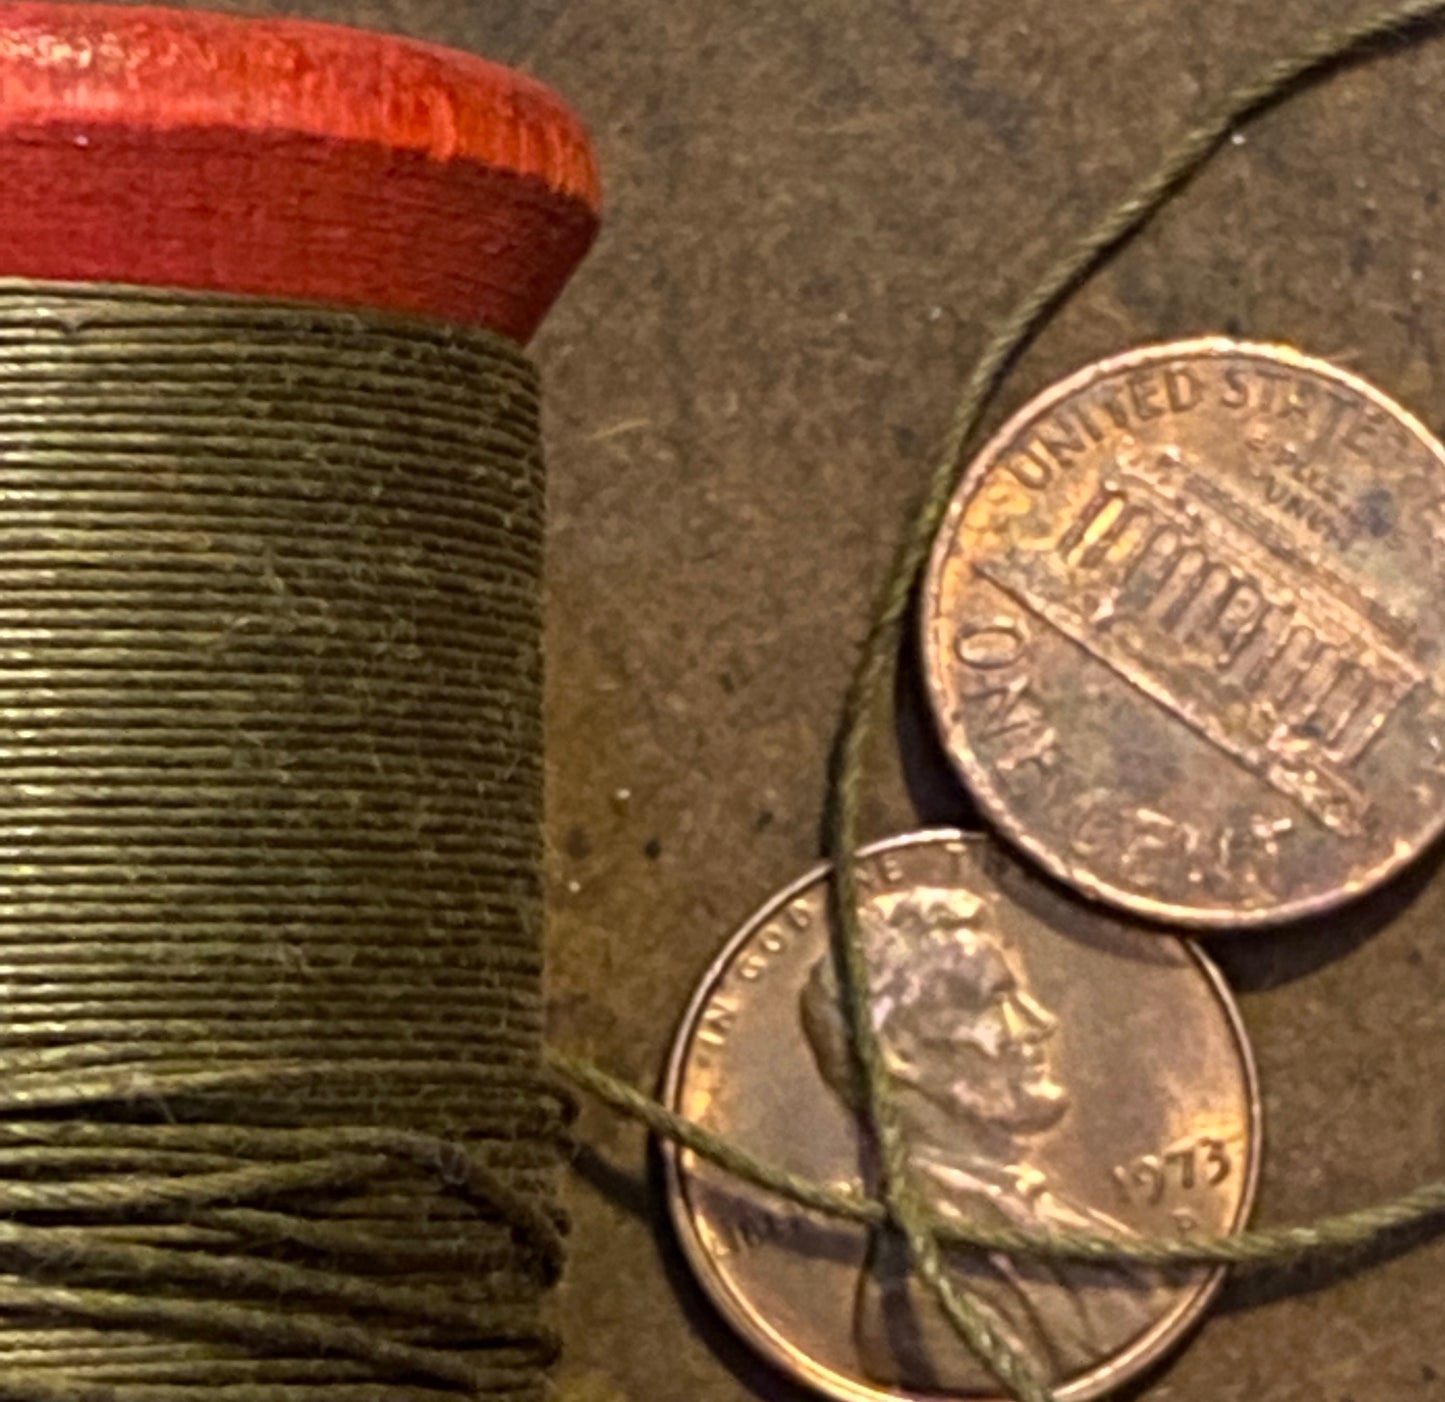 5 yards of heavy duty button and carpet utility thread / strong vintage cord / repair, retie, reattach / durable sewing string